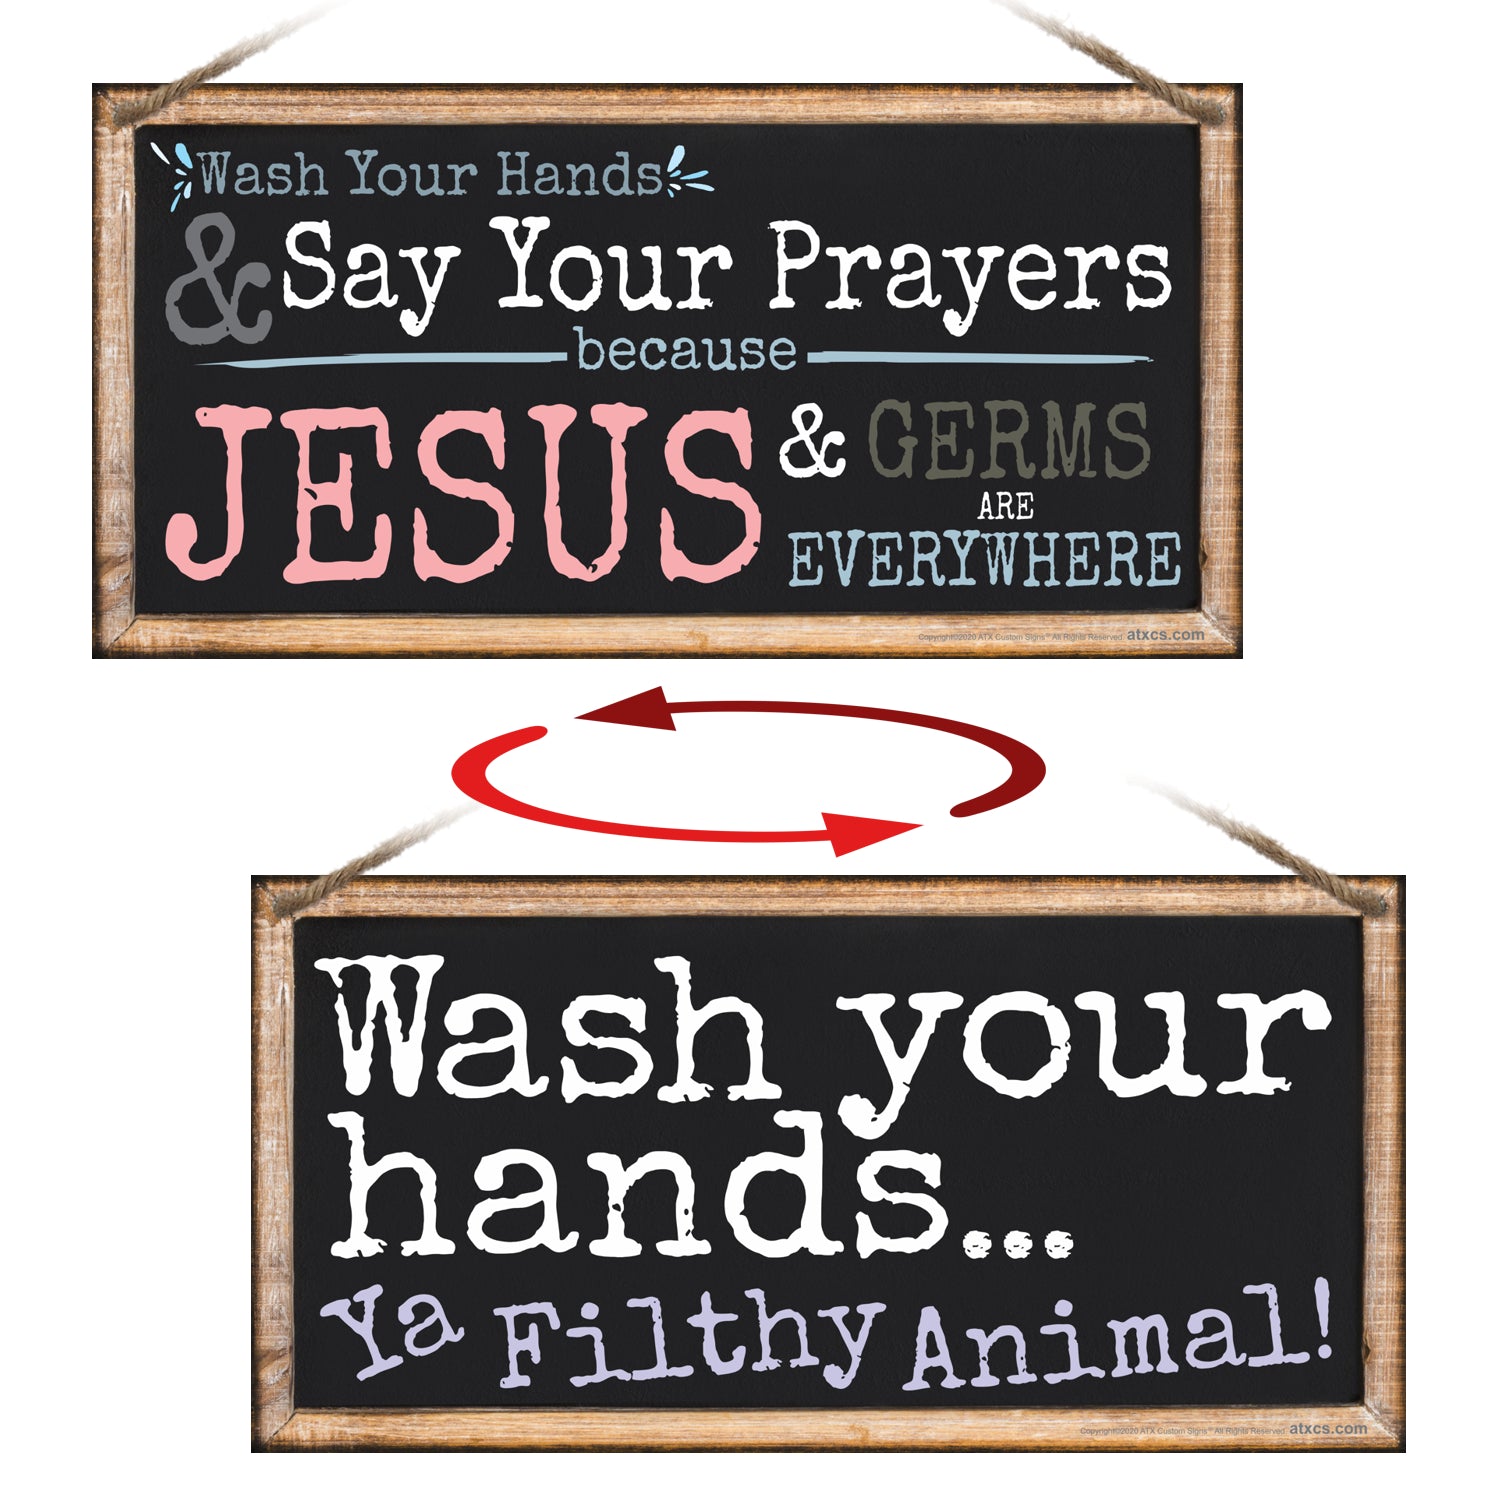 Jesus Germs and Wash Your Hands